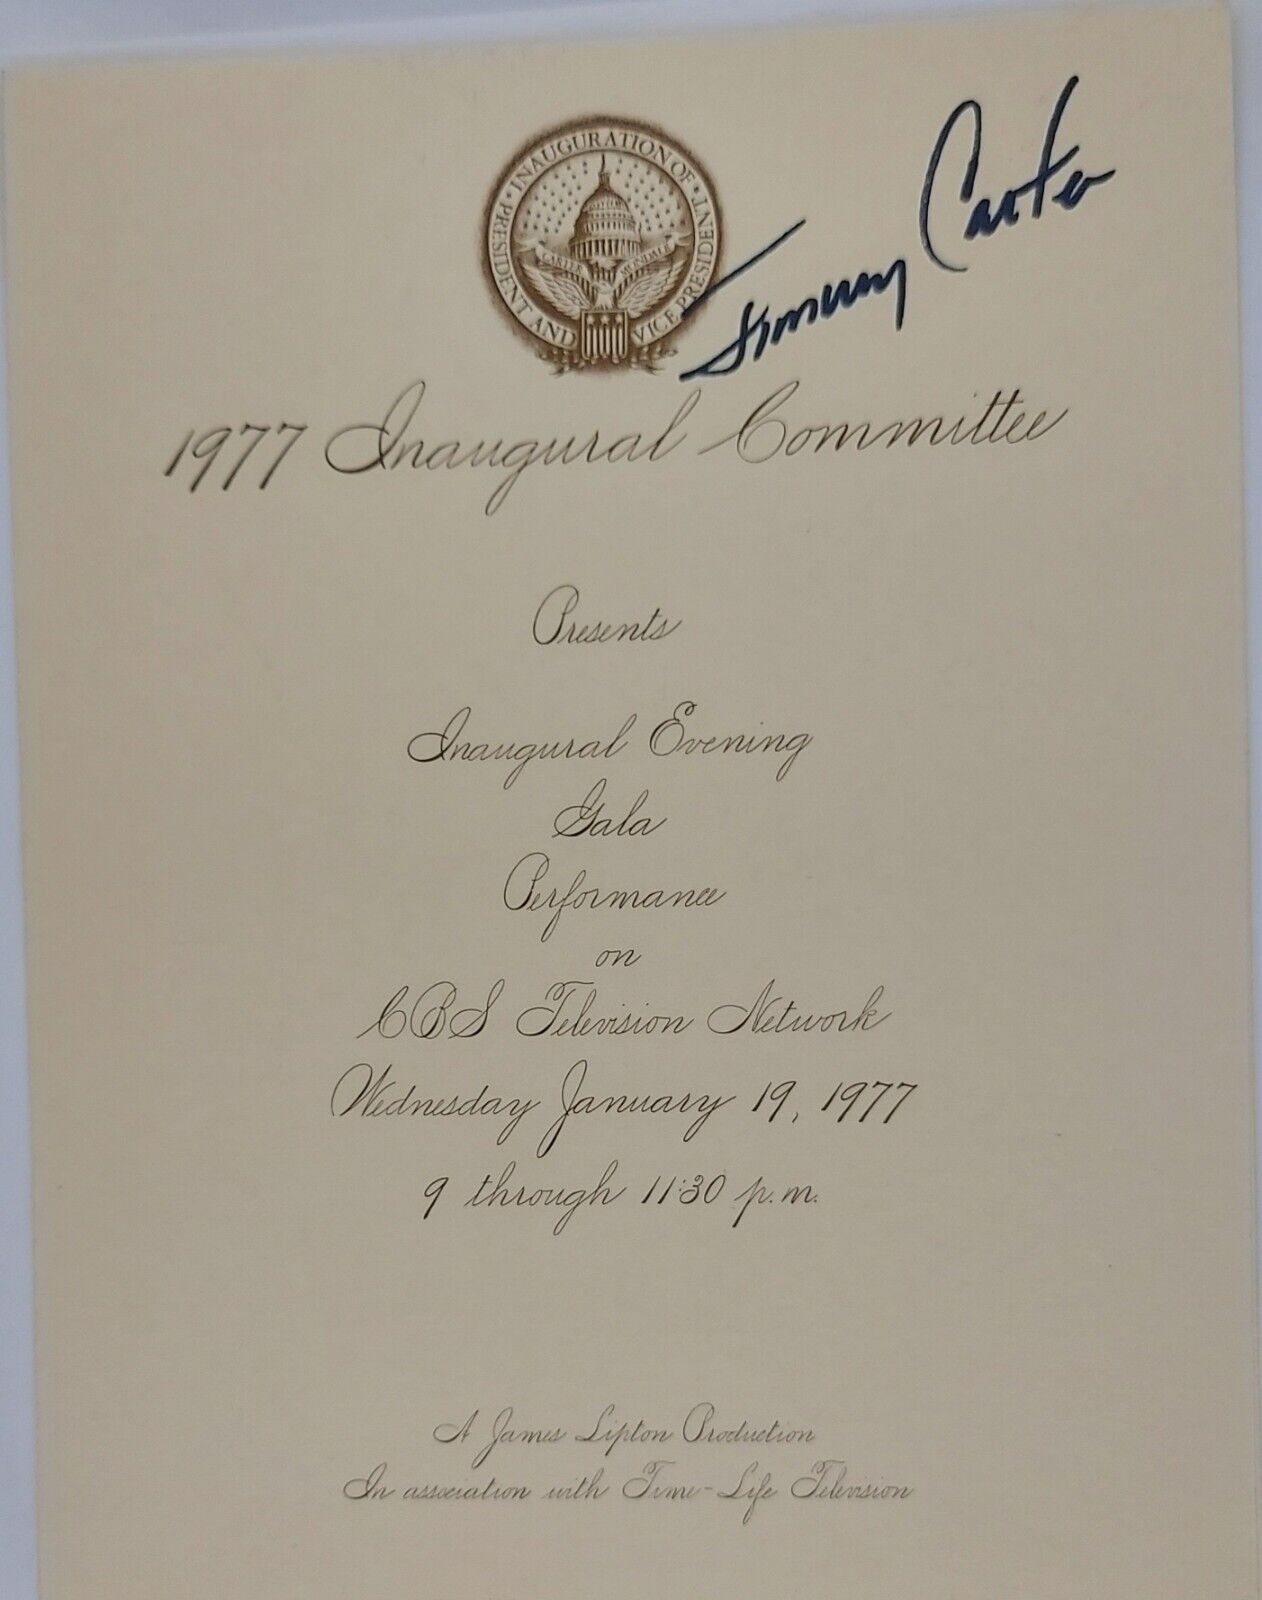  President Jimmy Carter Signed 1977 Inaugural Committee Program